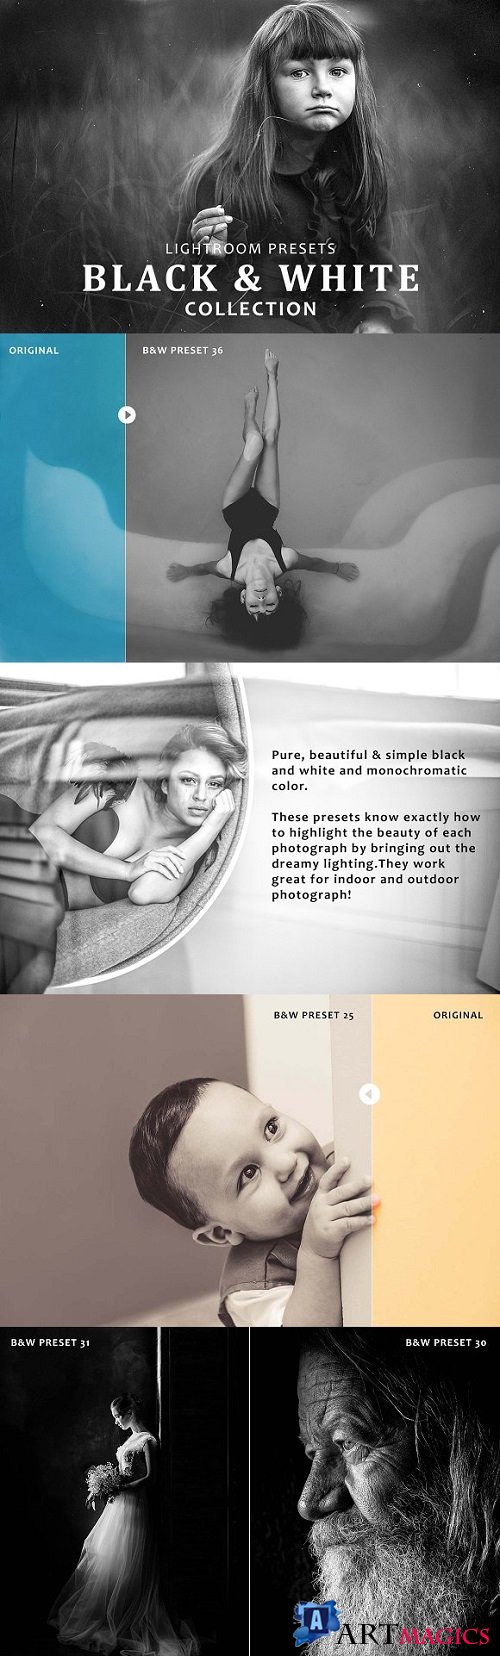 B & W Collection Lightroom Presets 1968815